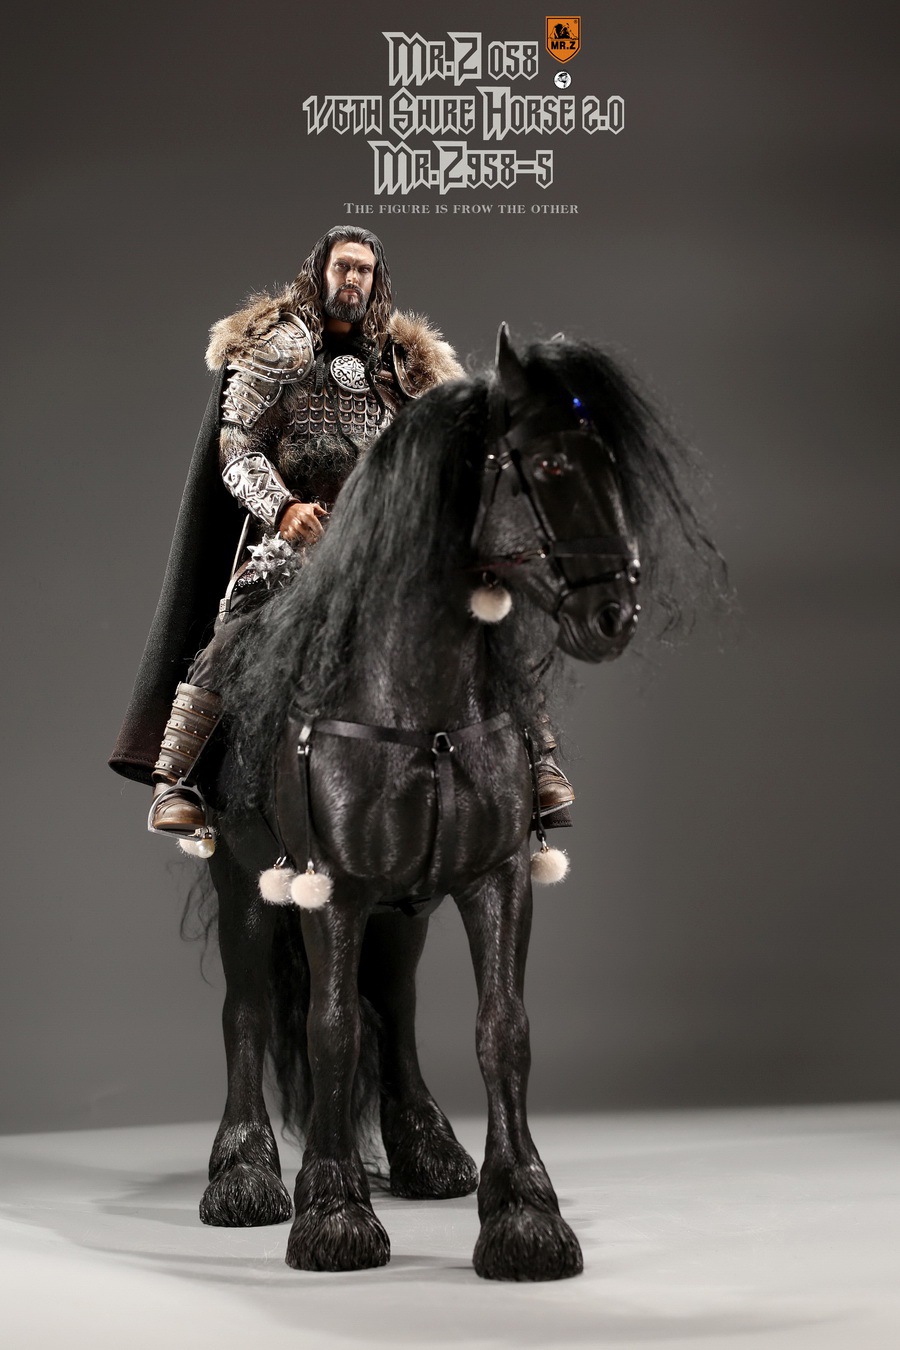 NEW PRODUCT: MR. Z: 58th round-Shire Horse 2.0 version full set of 5 colors  08580010